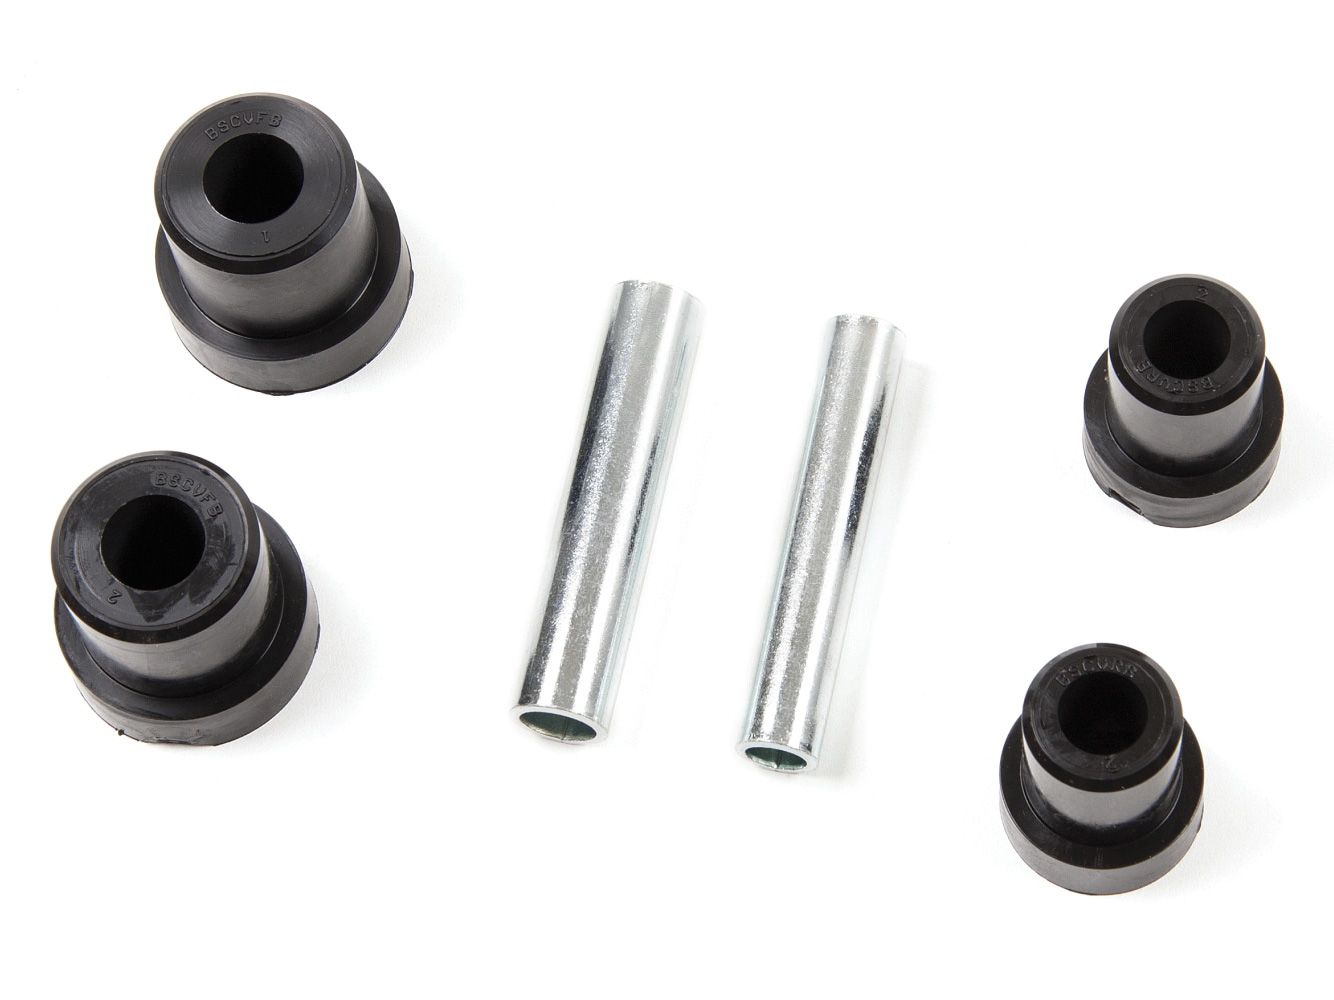 Pickup 1/2, 3/4 ton 1973-1987 GMC 4WD Front Leaf Spring Bushing Kit by Zone Off-Road